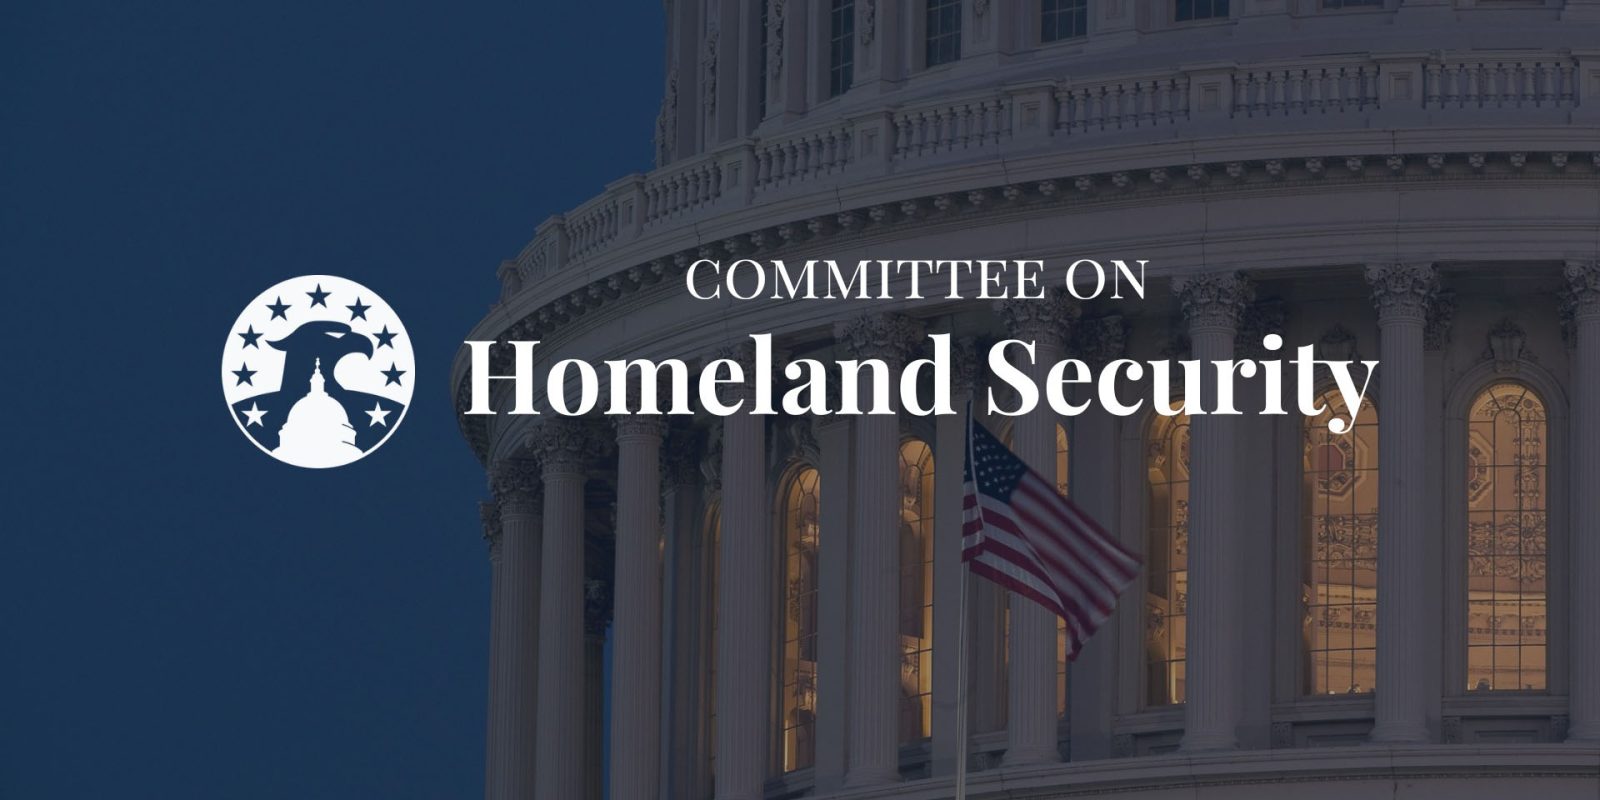 CrowdStrike CEO called to testify before Congress | Committee on Homeland Security graphic